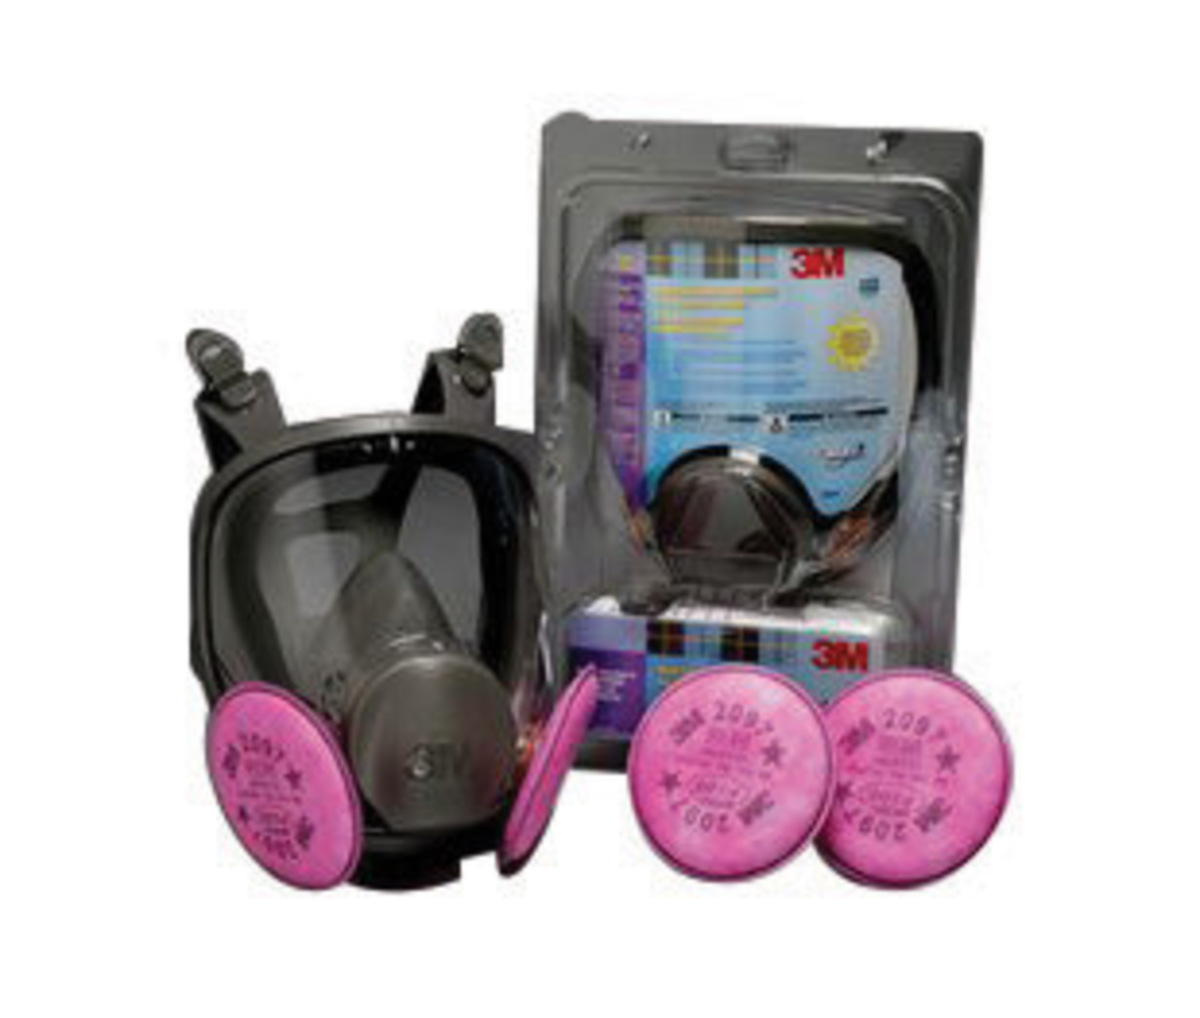 3M™ Large 6000 Series Full Face Air Purifying Respirator (Availability restrictions apply.)